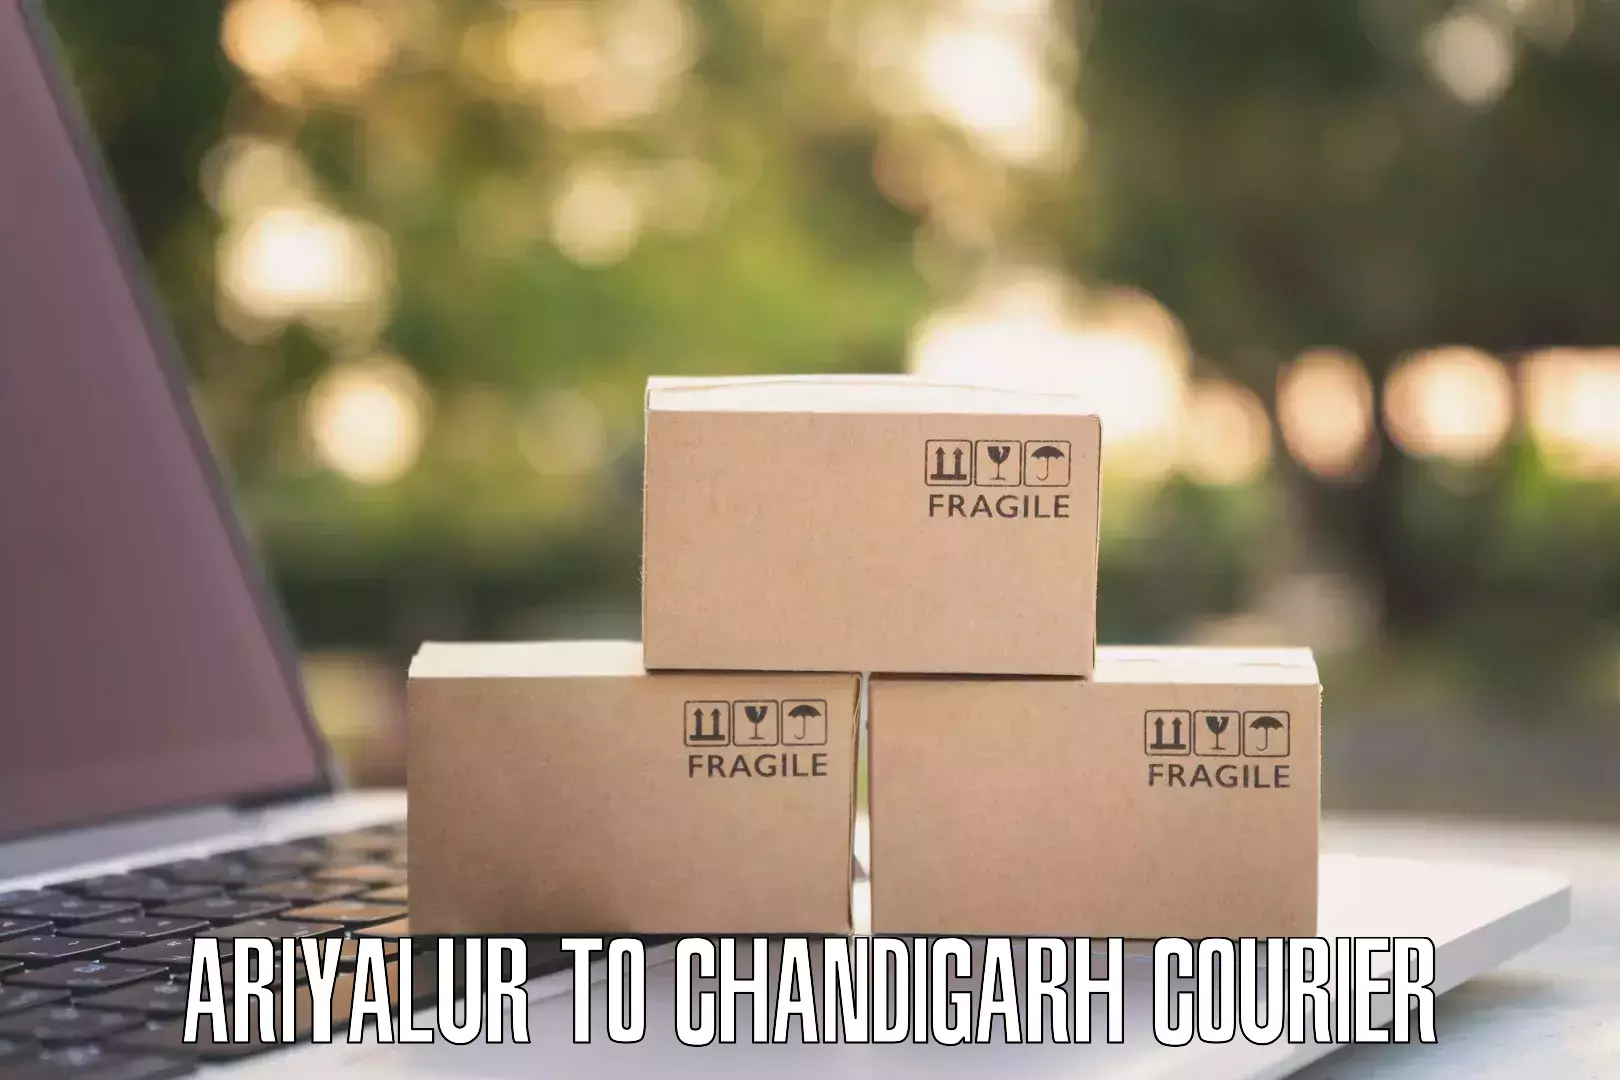 Cash on delivery service Ariyalur to Chandigarh